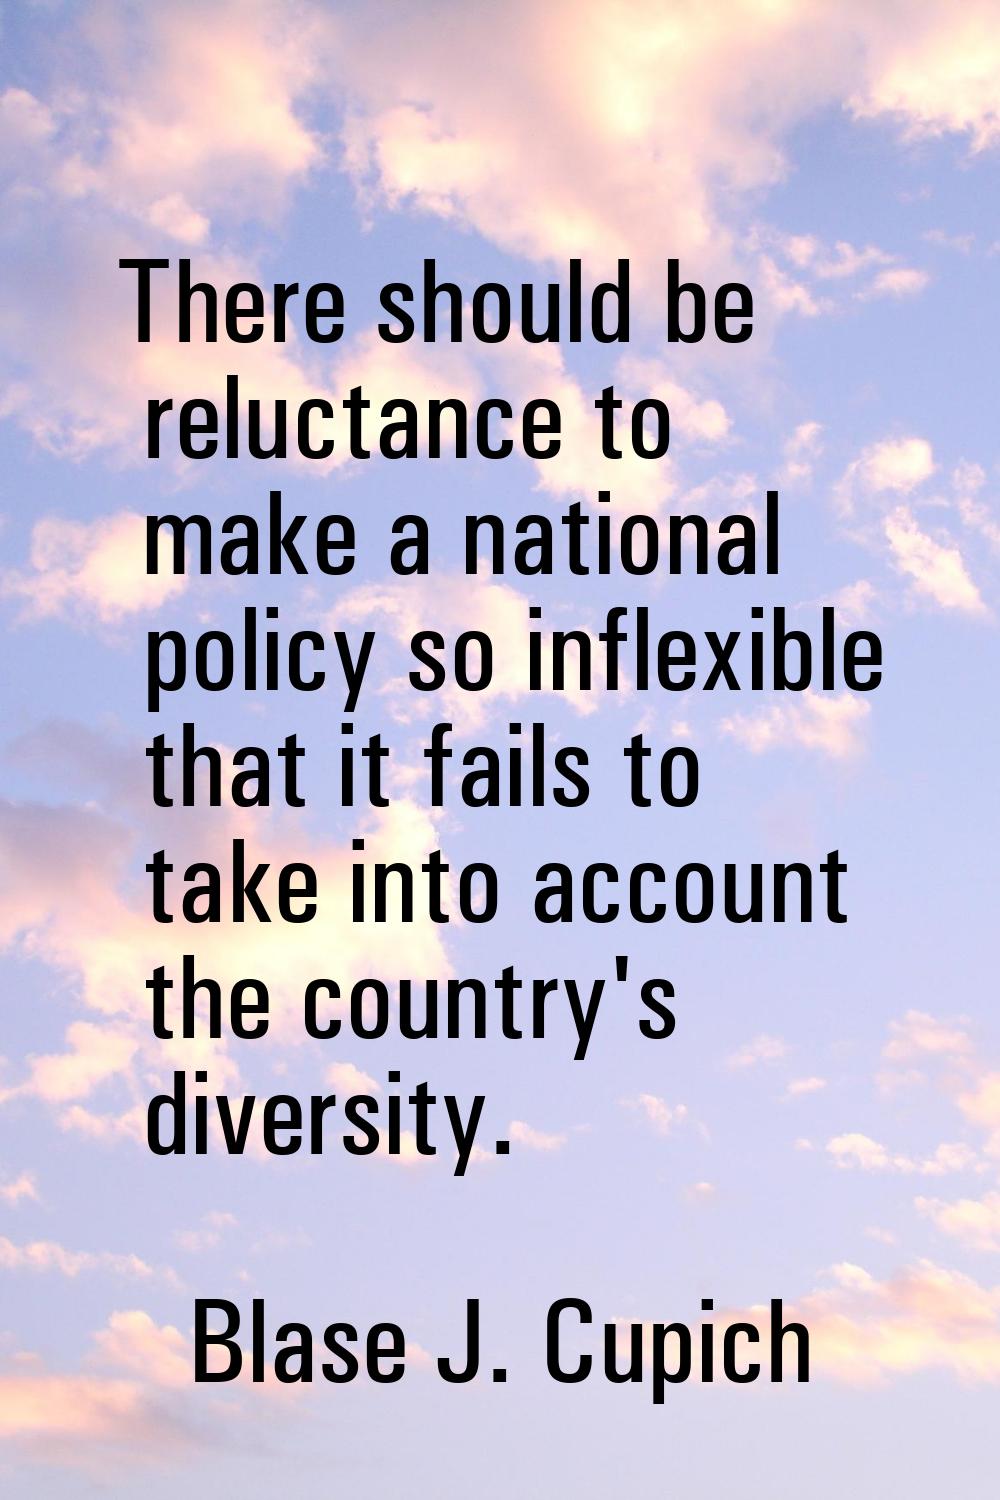 There should be reluctance to make a national policy so inflexible that it fails to take into accou